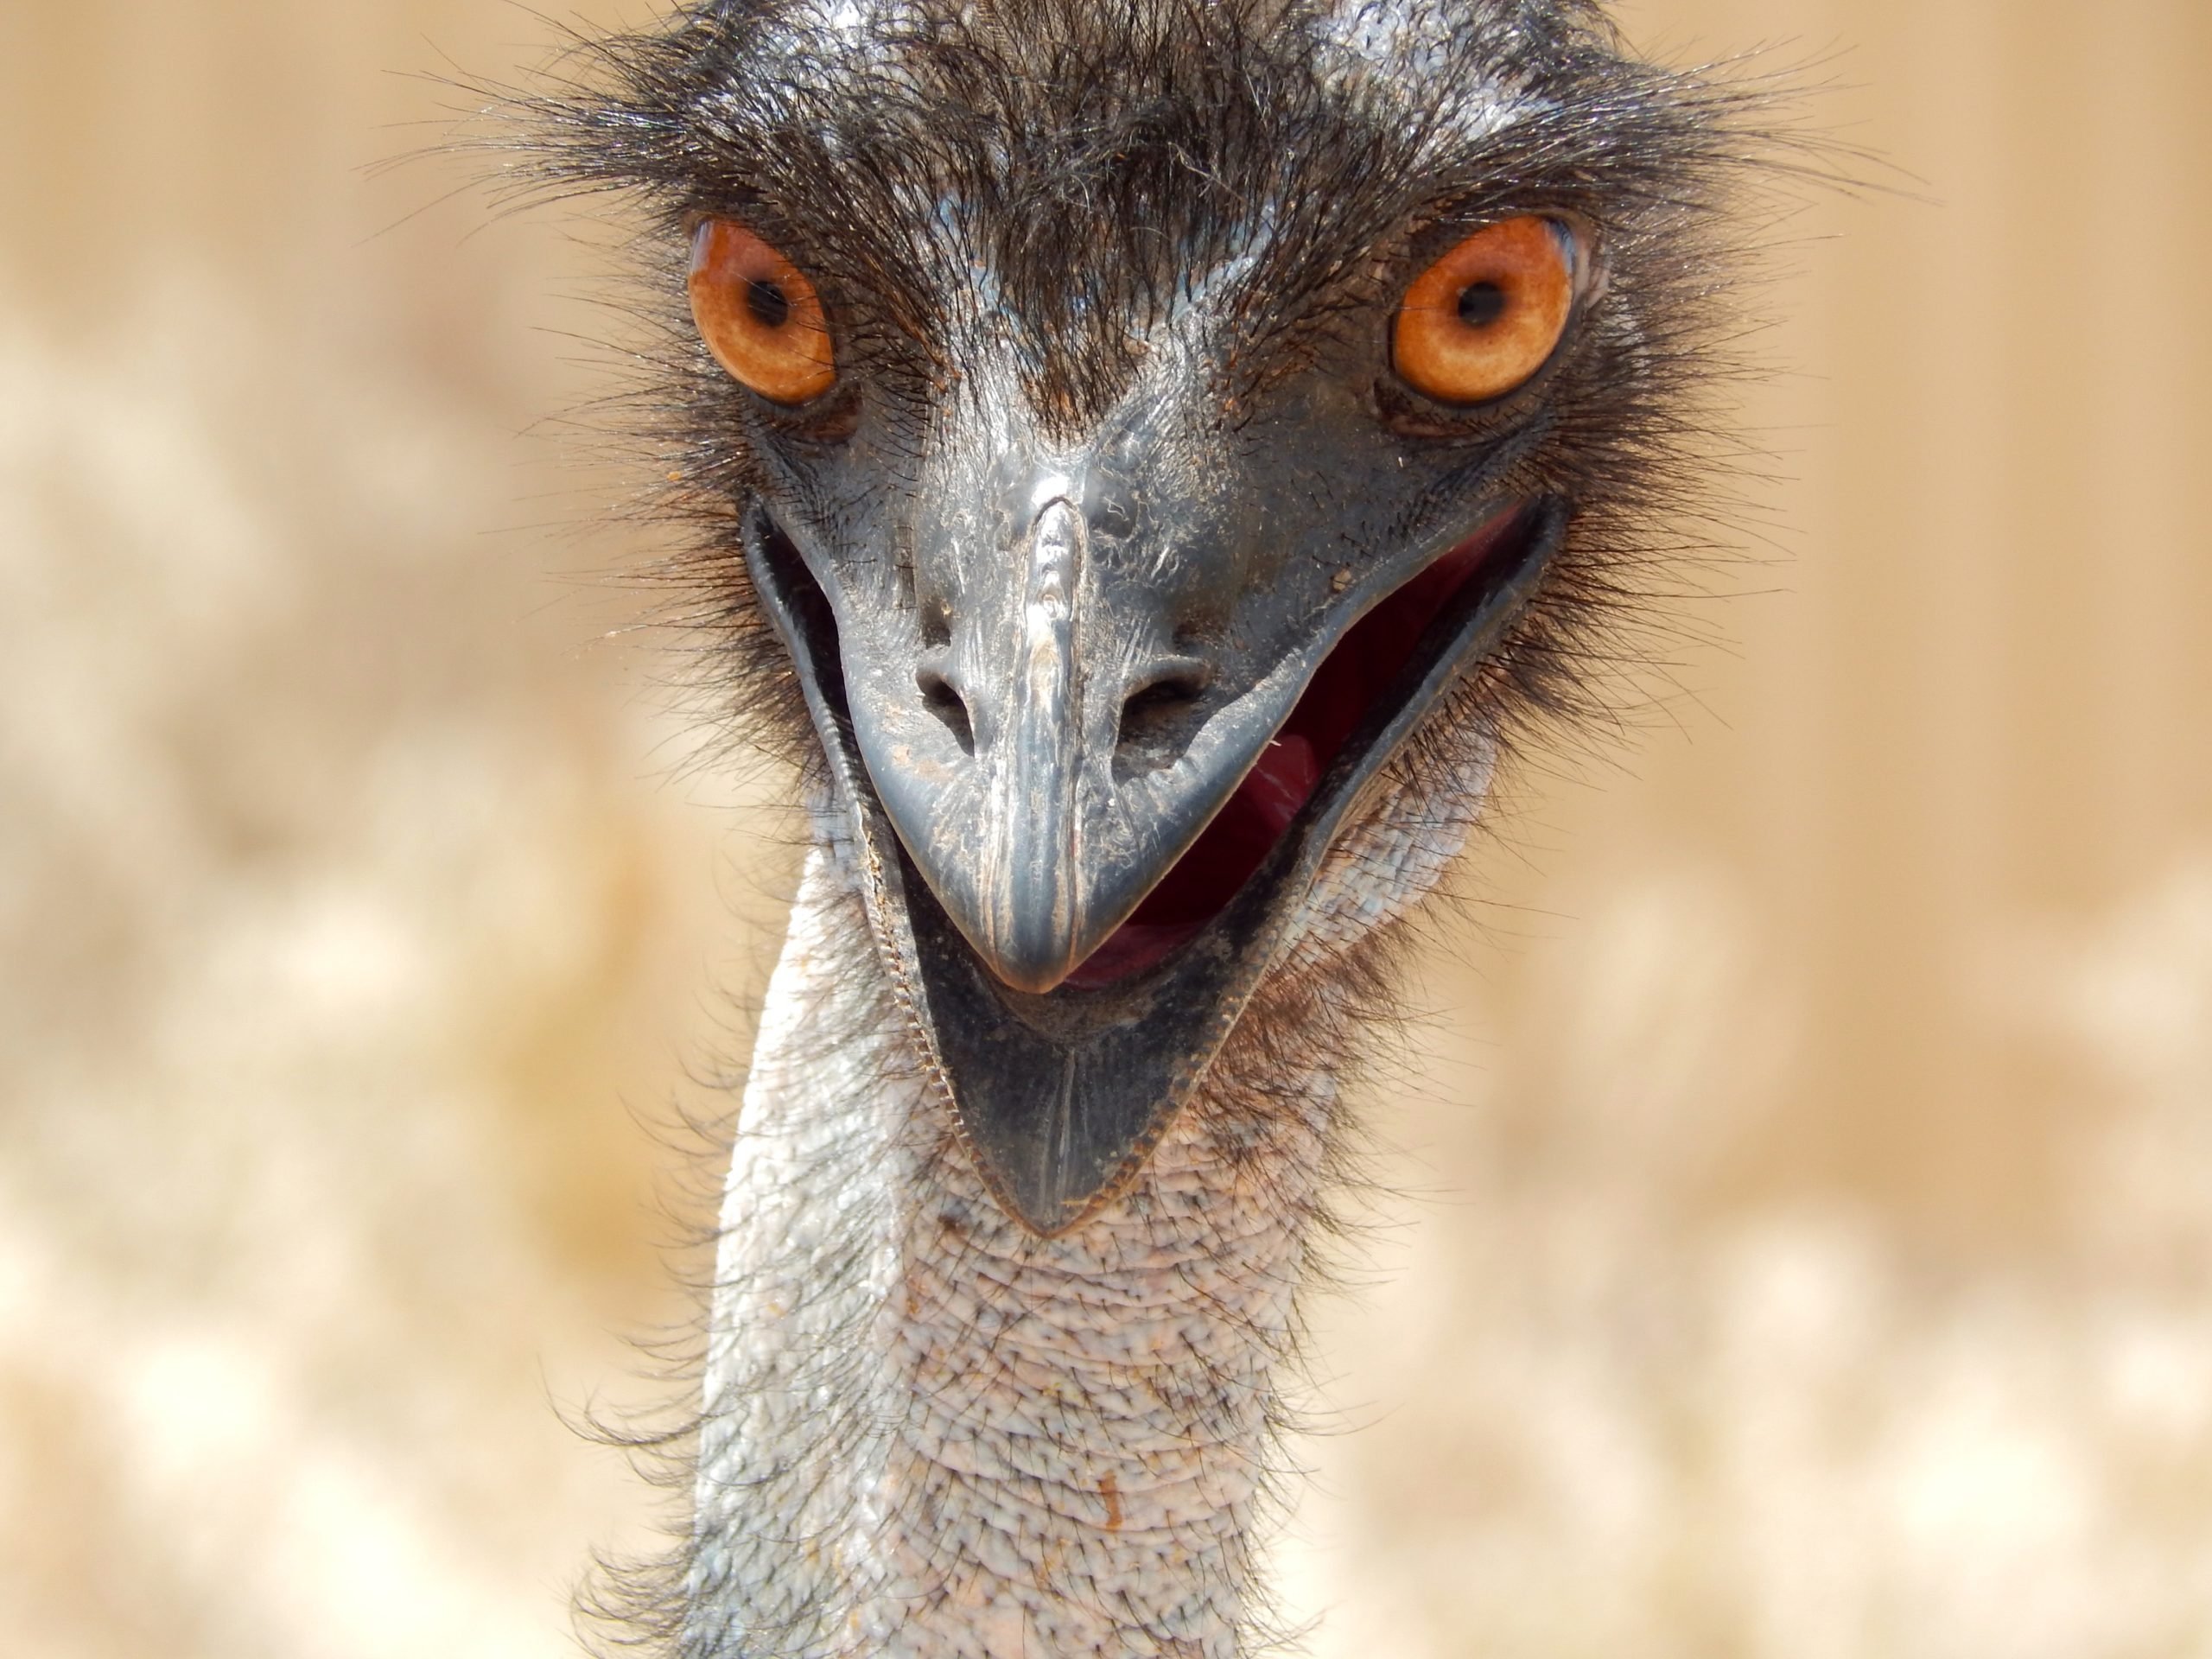 A close-up of an emu's open-beaked face, so it seems to have a surprised expression.